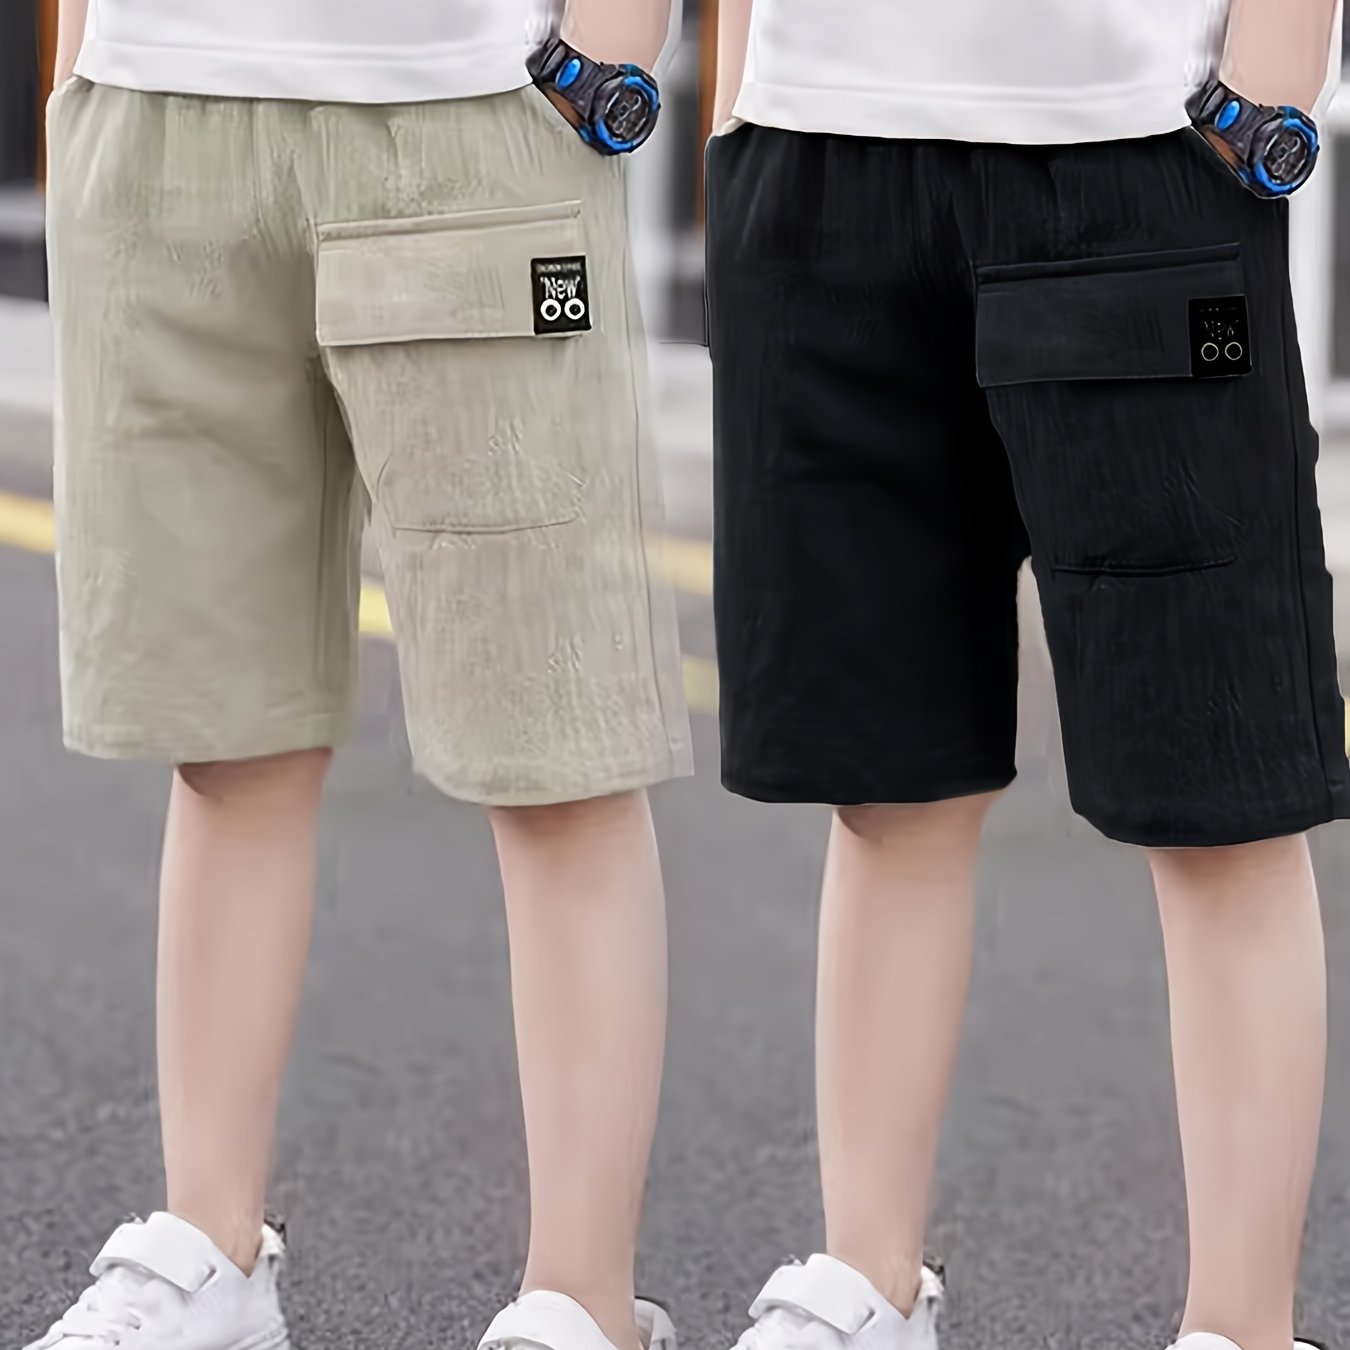 2pcs Boys Ultra - Soft Elastic Waist Solid Cotton Shorts - Trendy & Comfortable, Creative Design for Summer Outdoor Adventures - Ammpoure Wellbeing